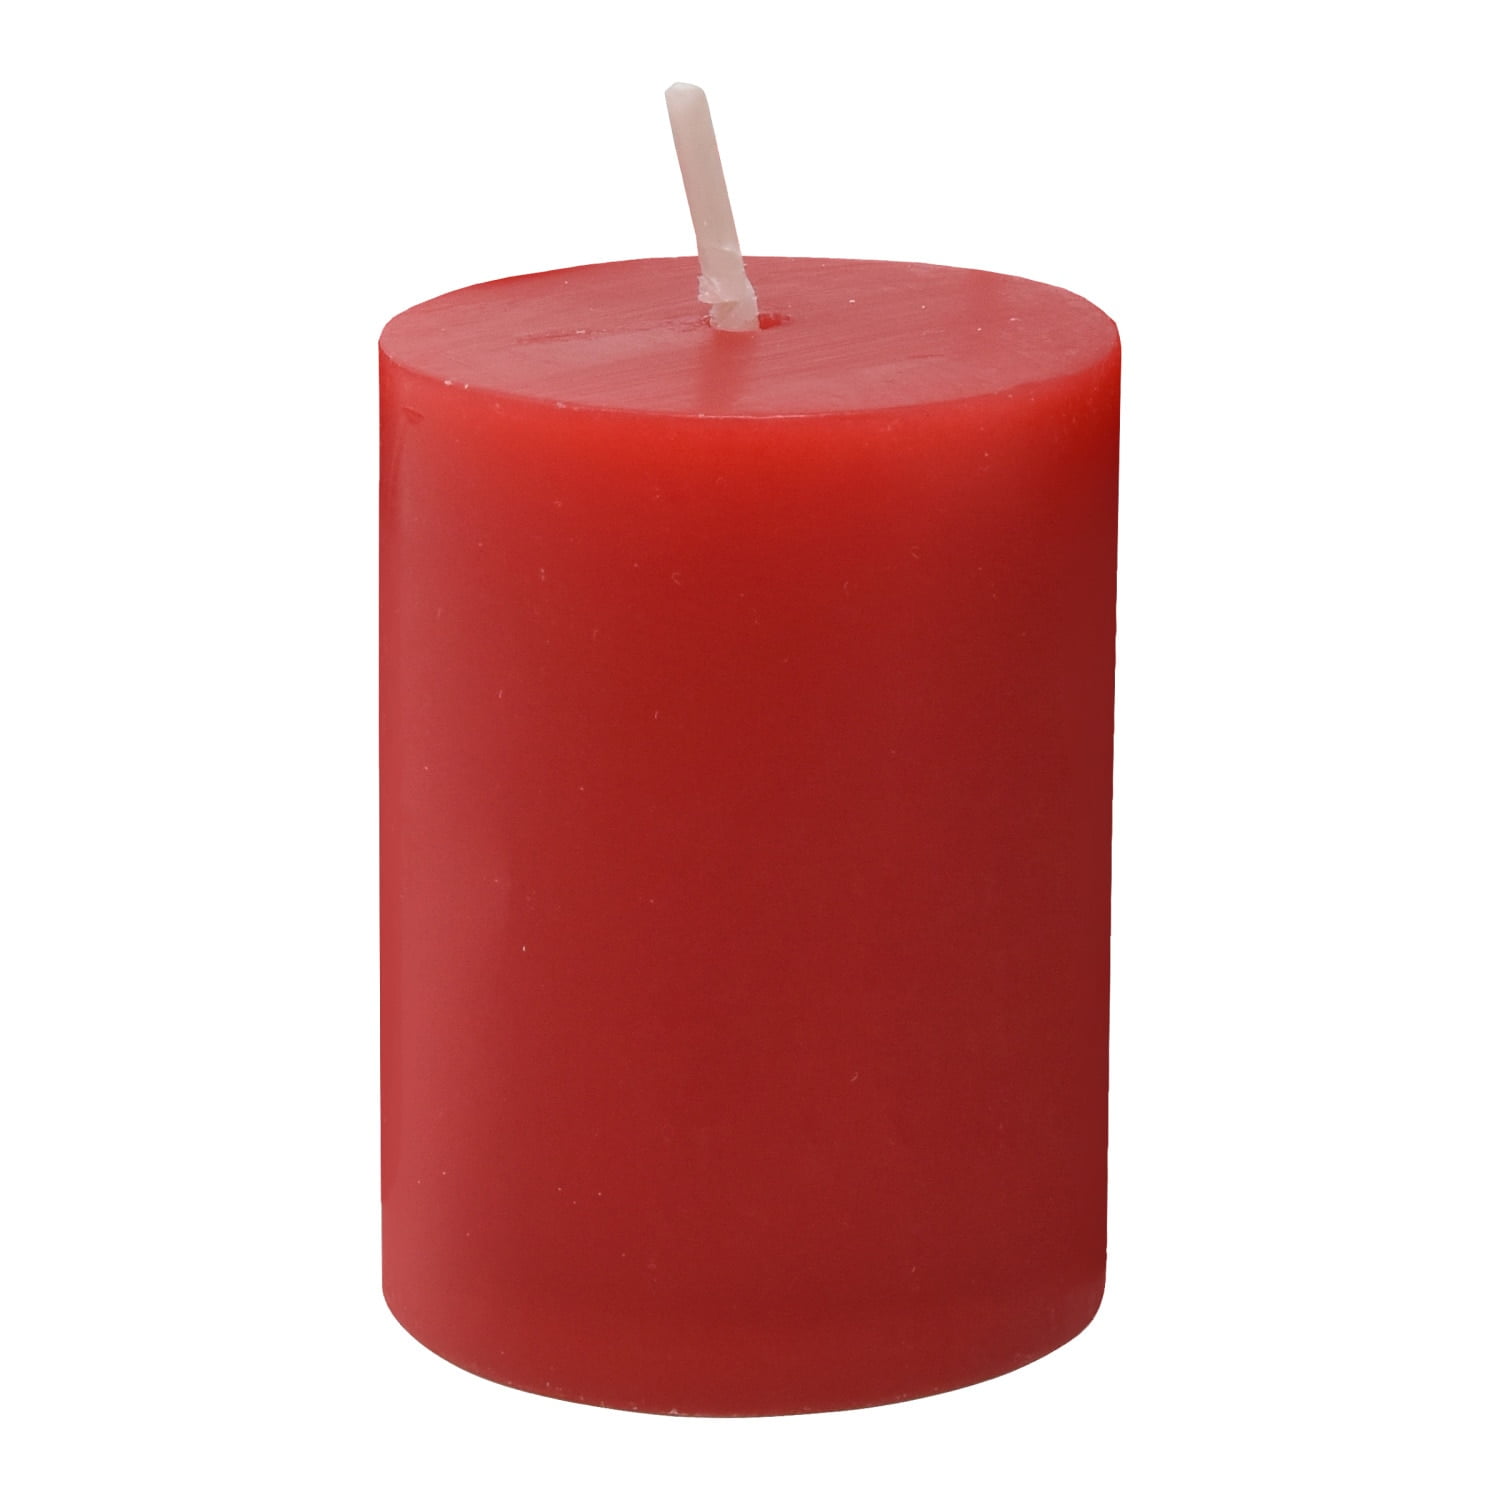 Votive Candles, 3-ct. Box - 3 Pack Apple-Cinnamon Scented - 9 Votive Candles  Total 